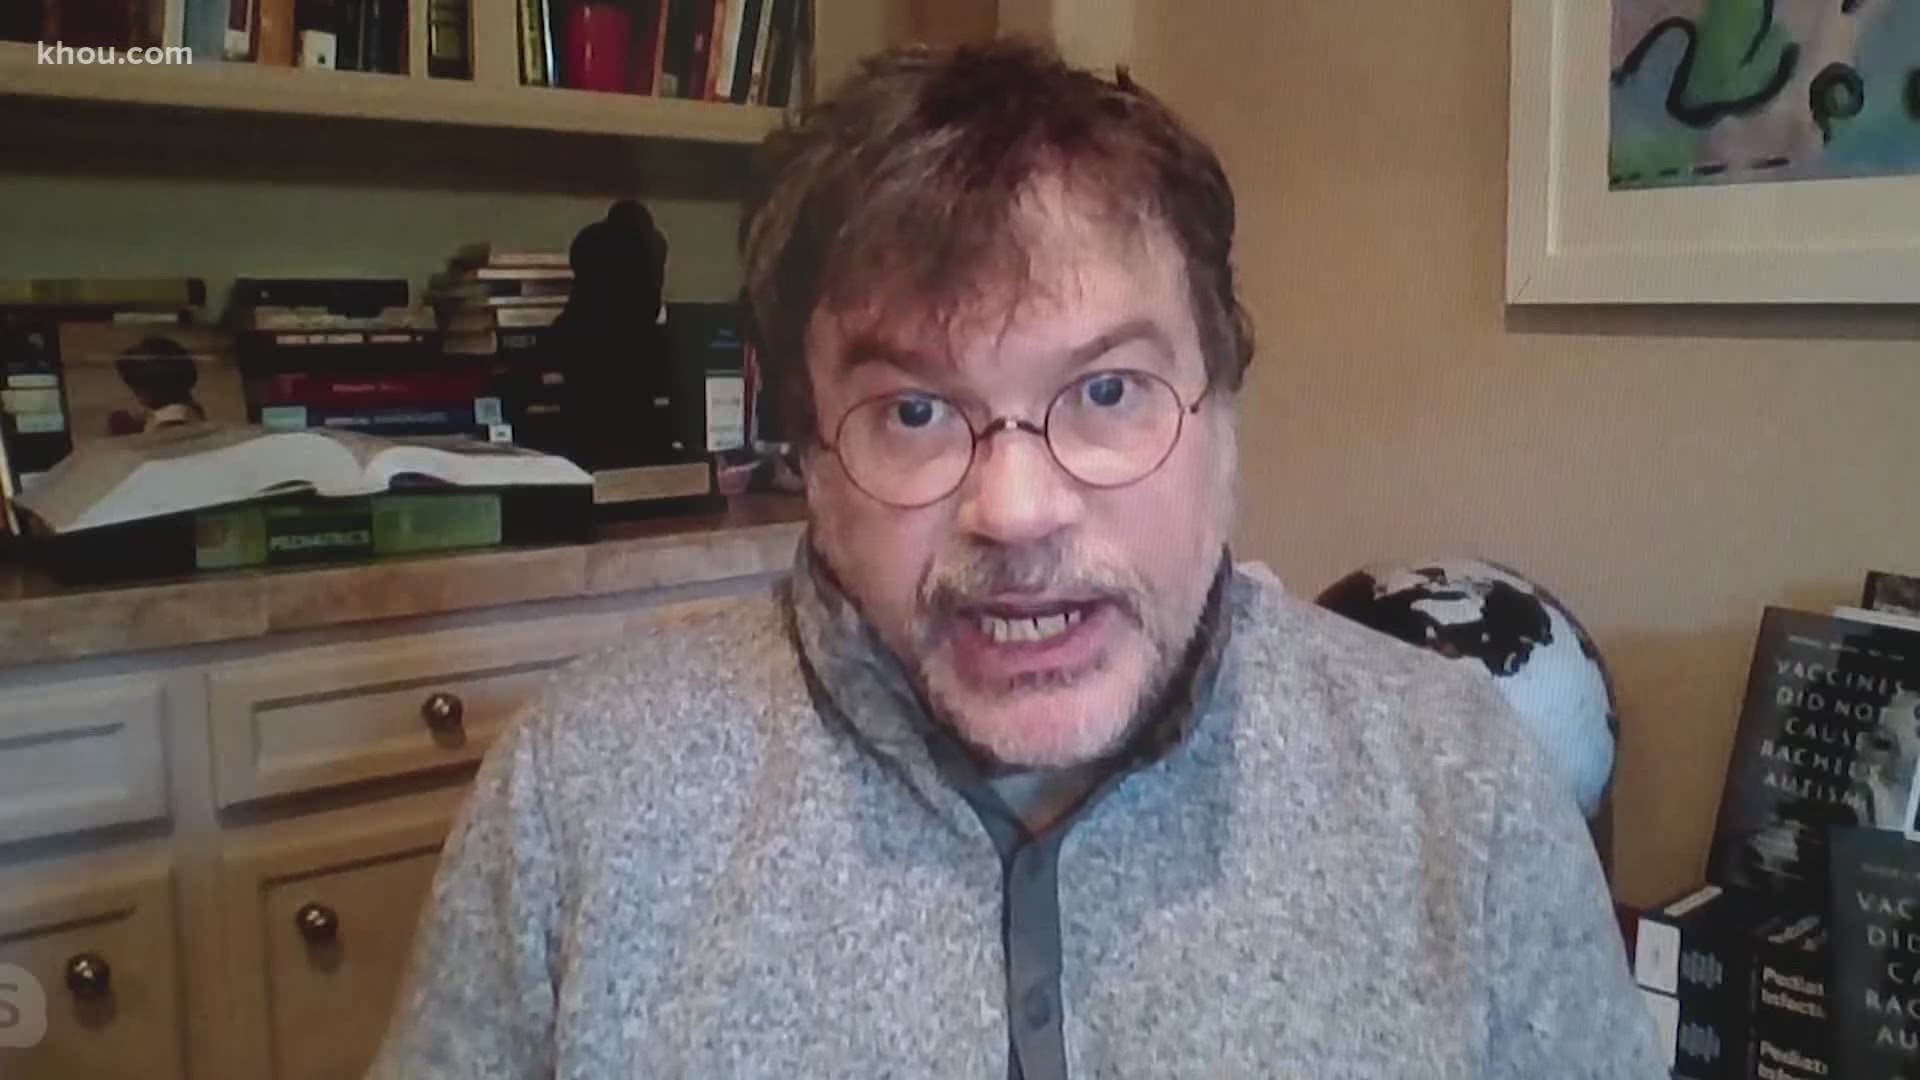 Infectious disease expert Dr. Peter Hotez says people are "relaxing social distancing to a much greater extent than we thought" and warns of a second COVID-19 wave.